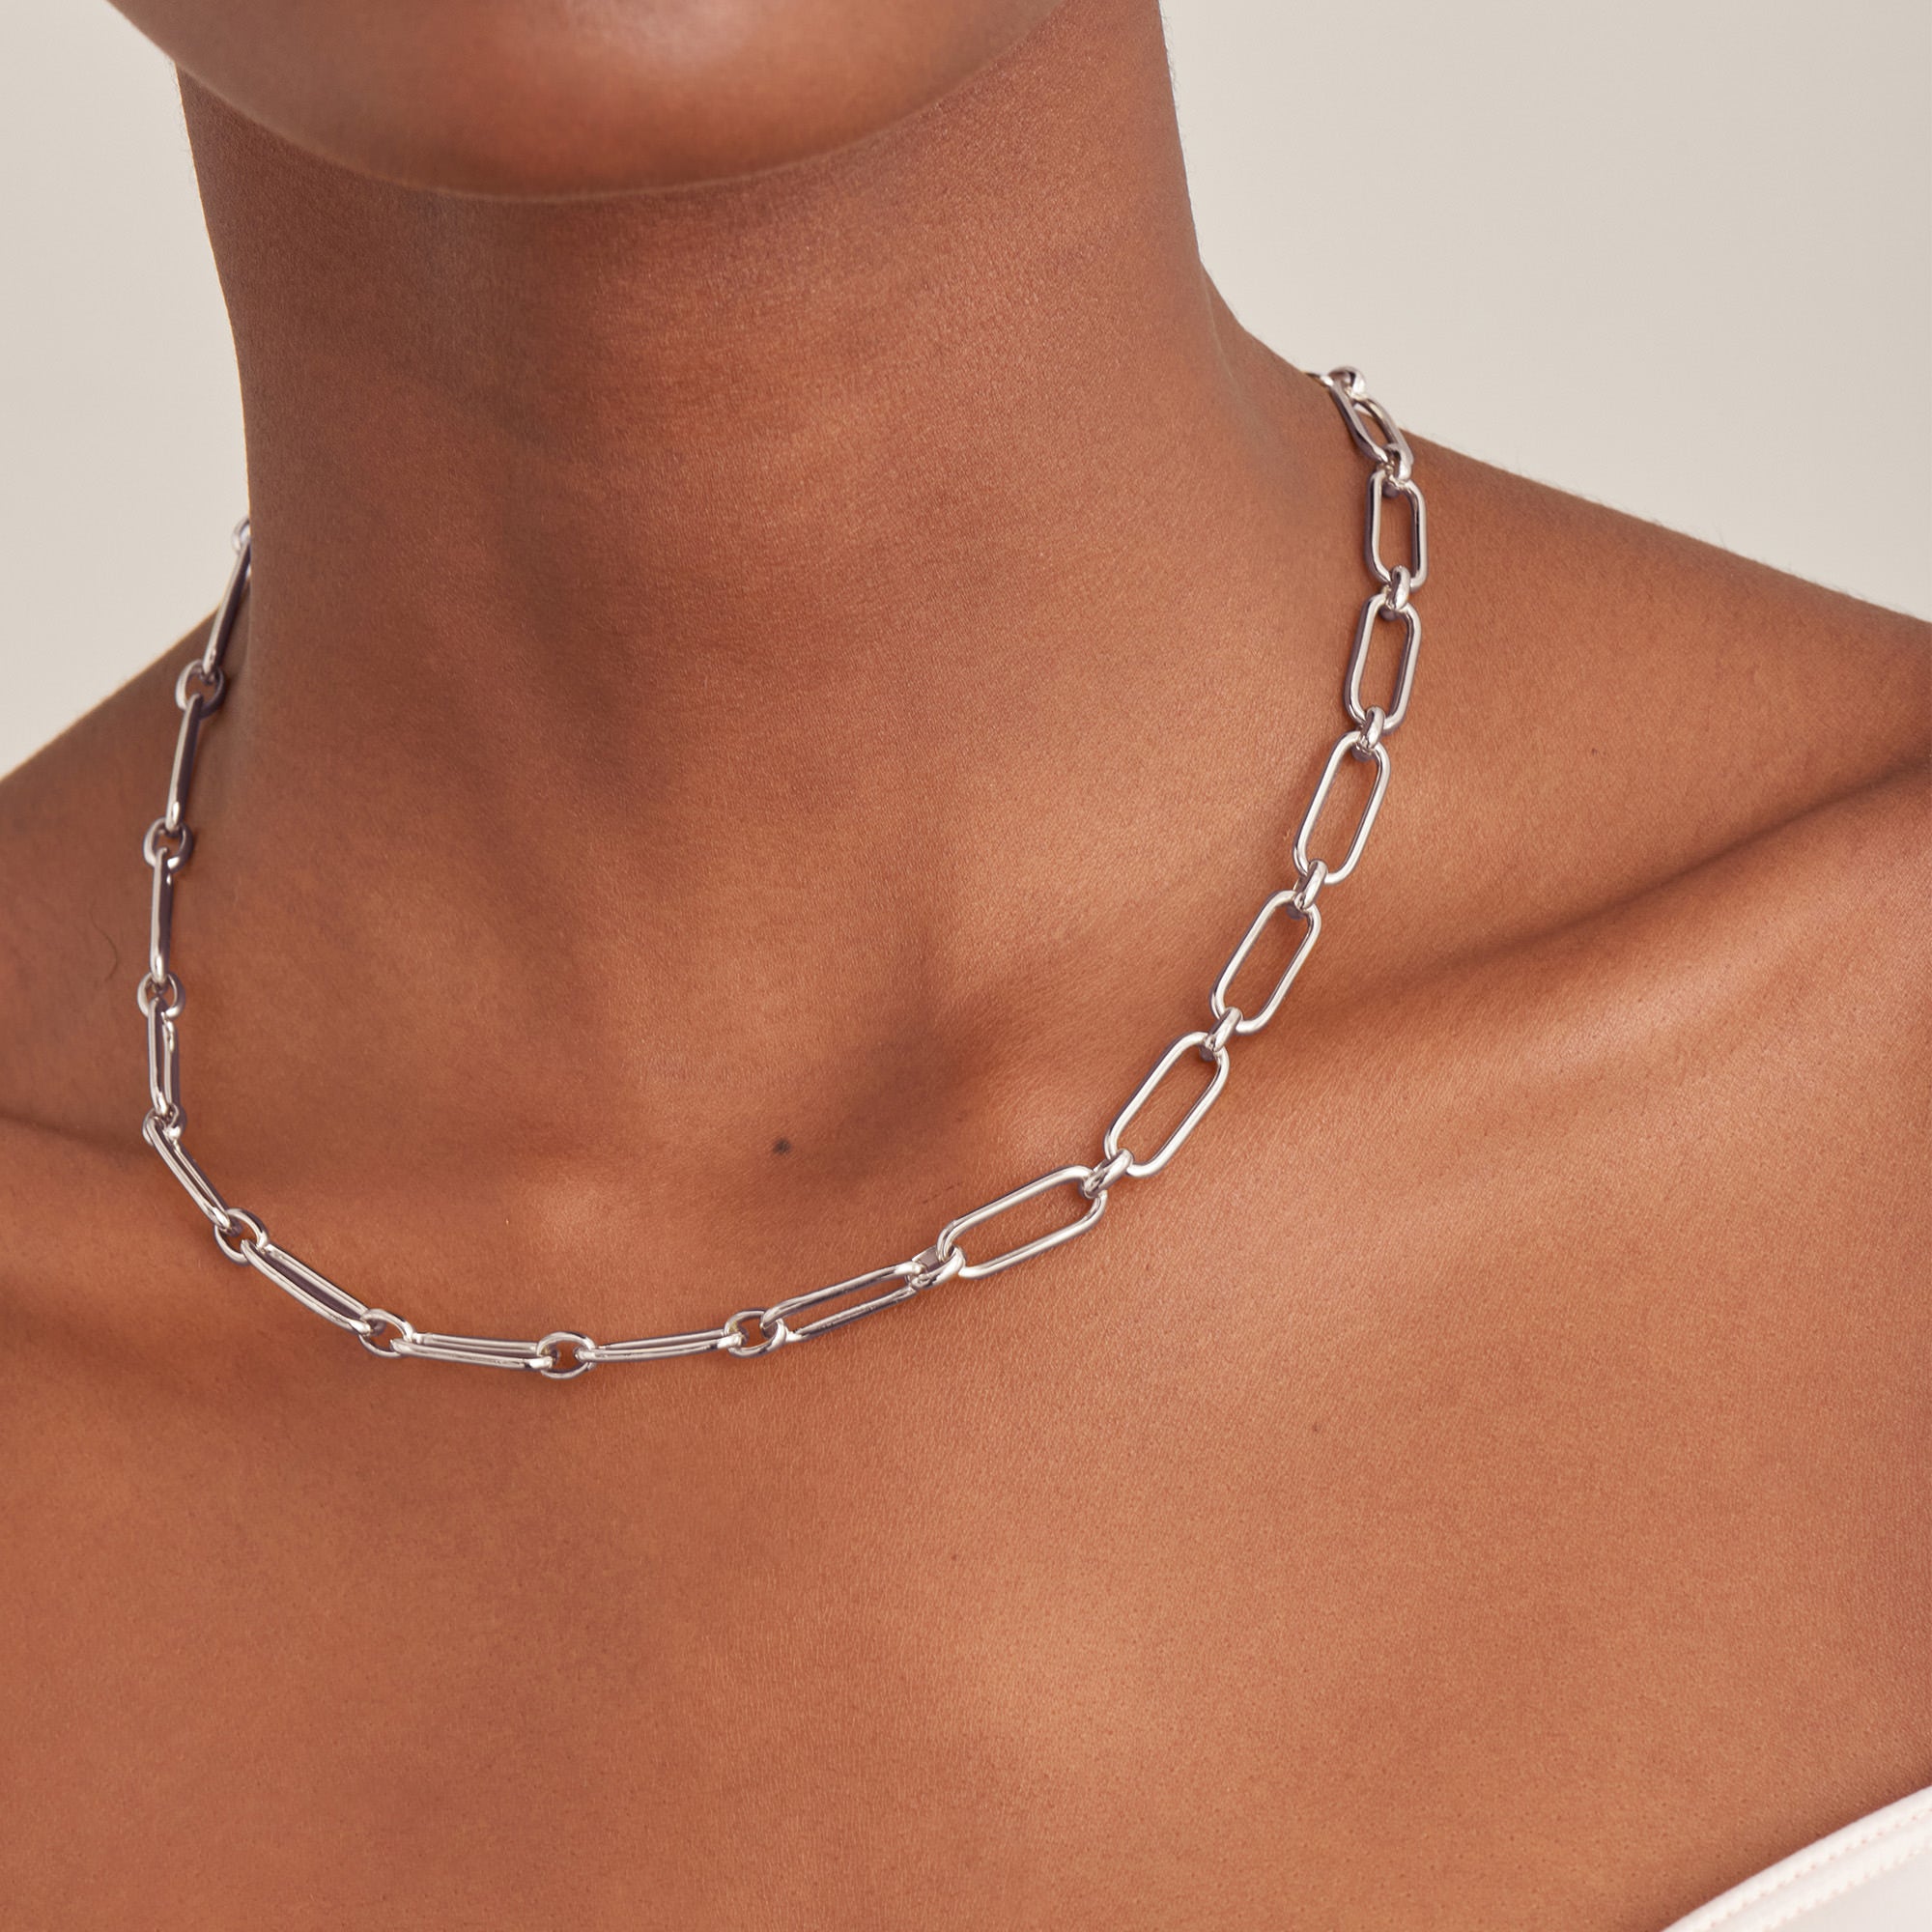 Weekday Fast chunky chain necklace in silver | ASOS